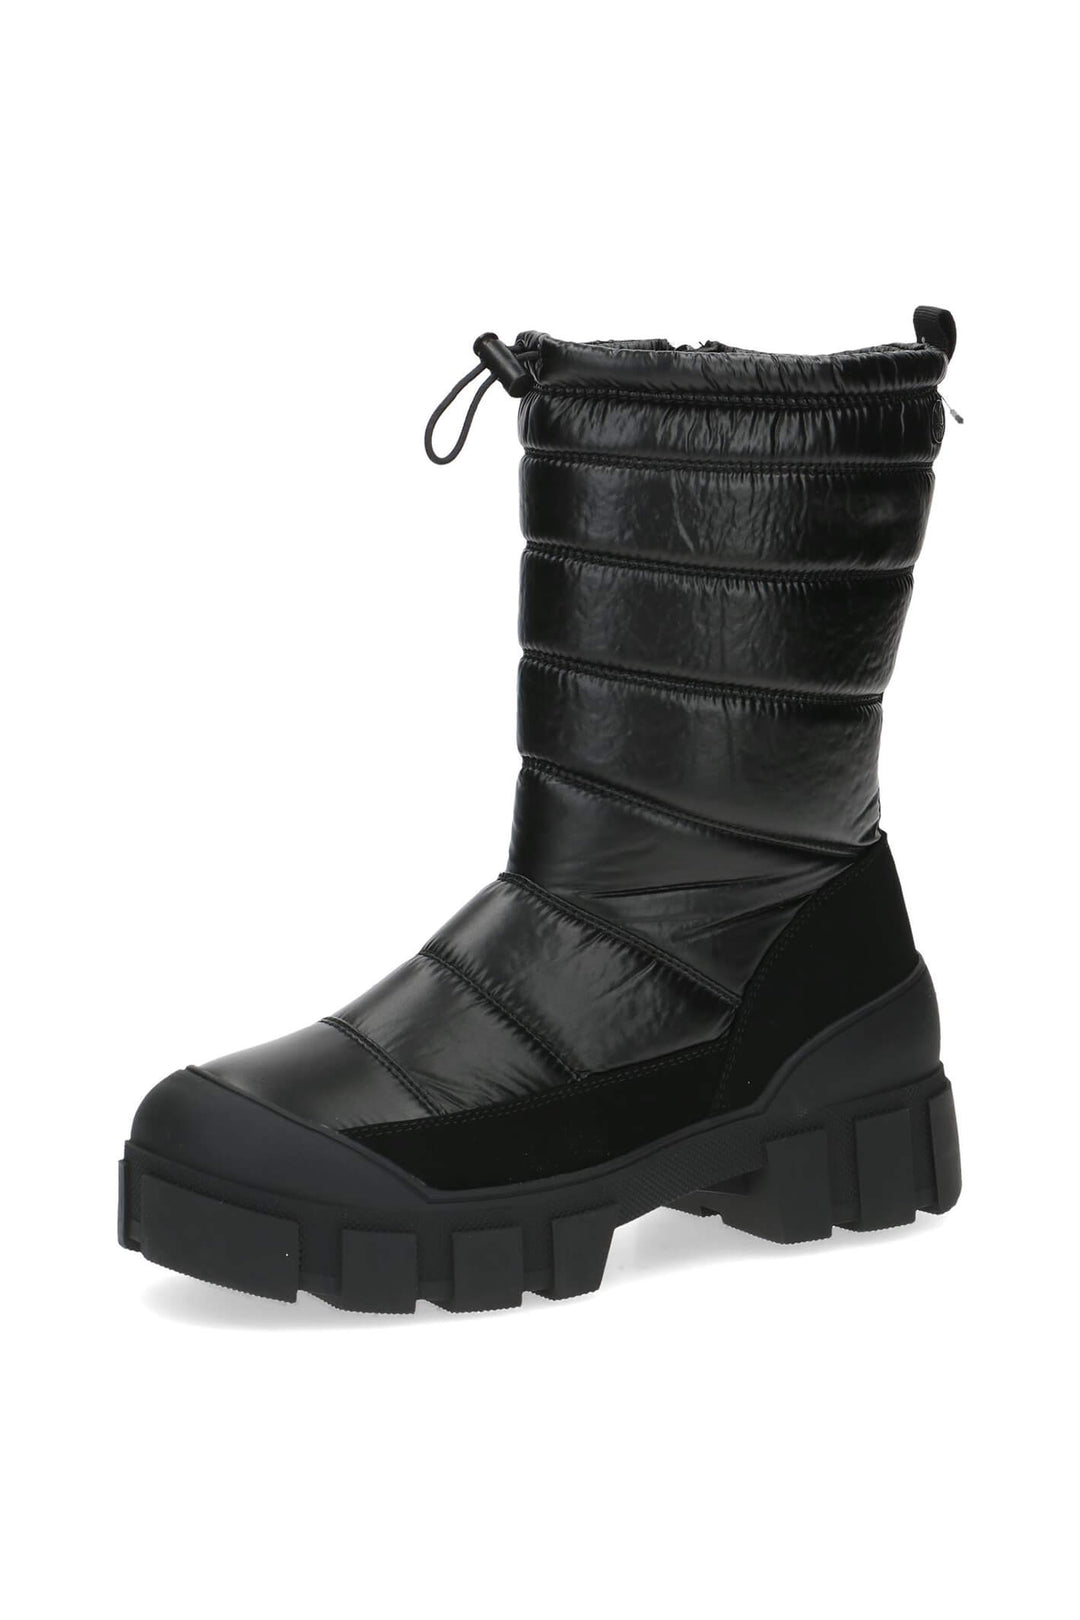 Caprice Tora 26444 Black Drawstring Top Waterproof Snow Boots - Experience Boutique